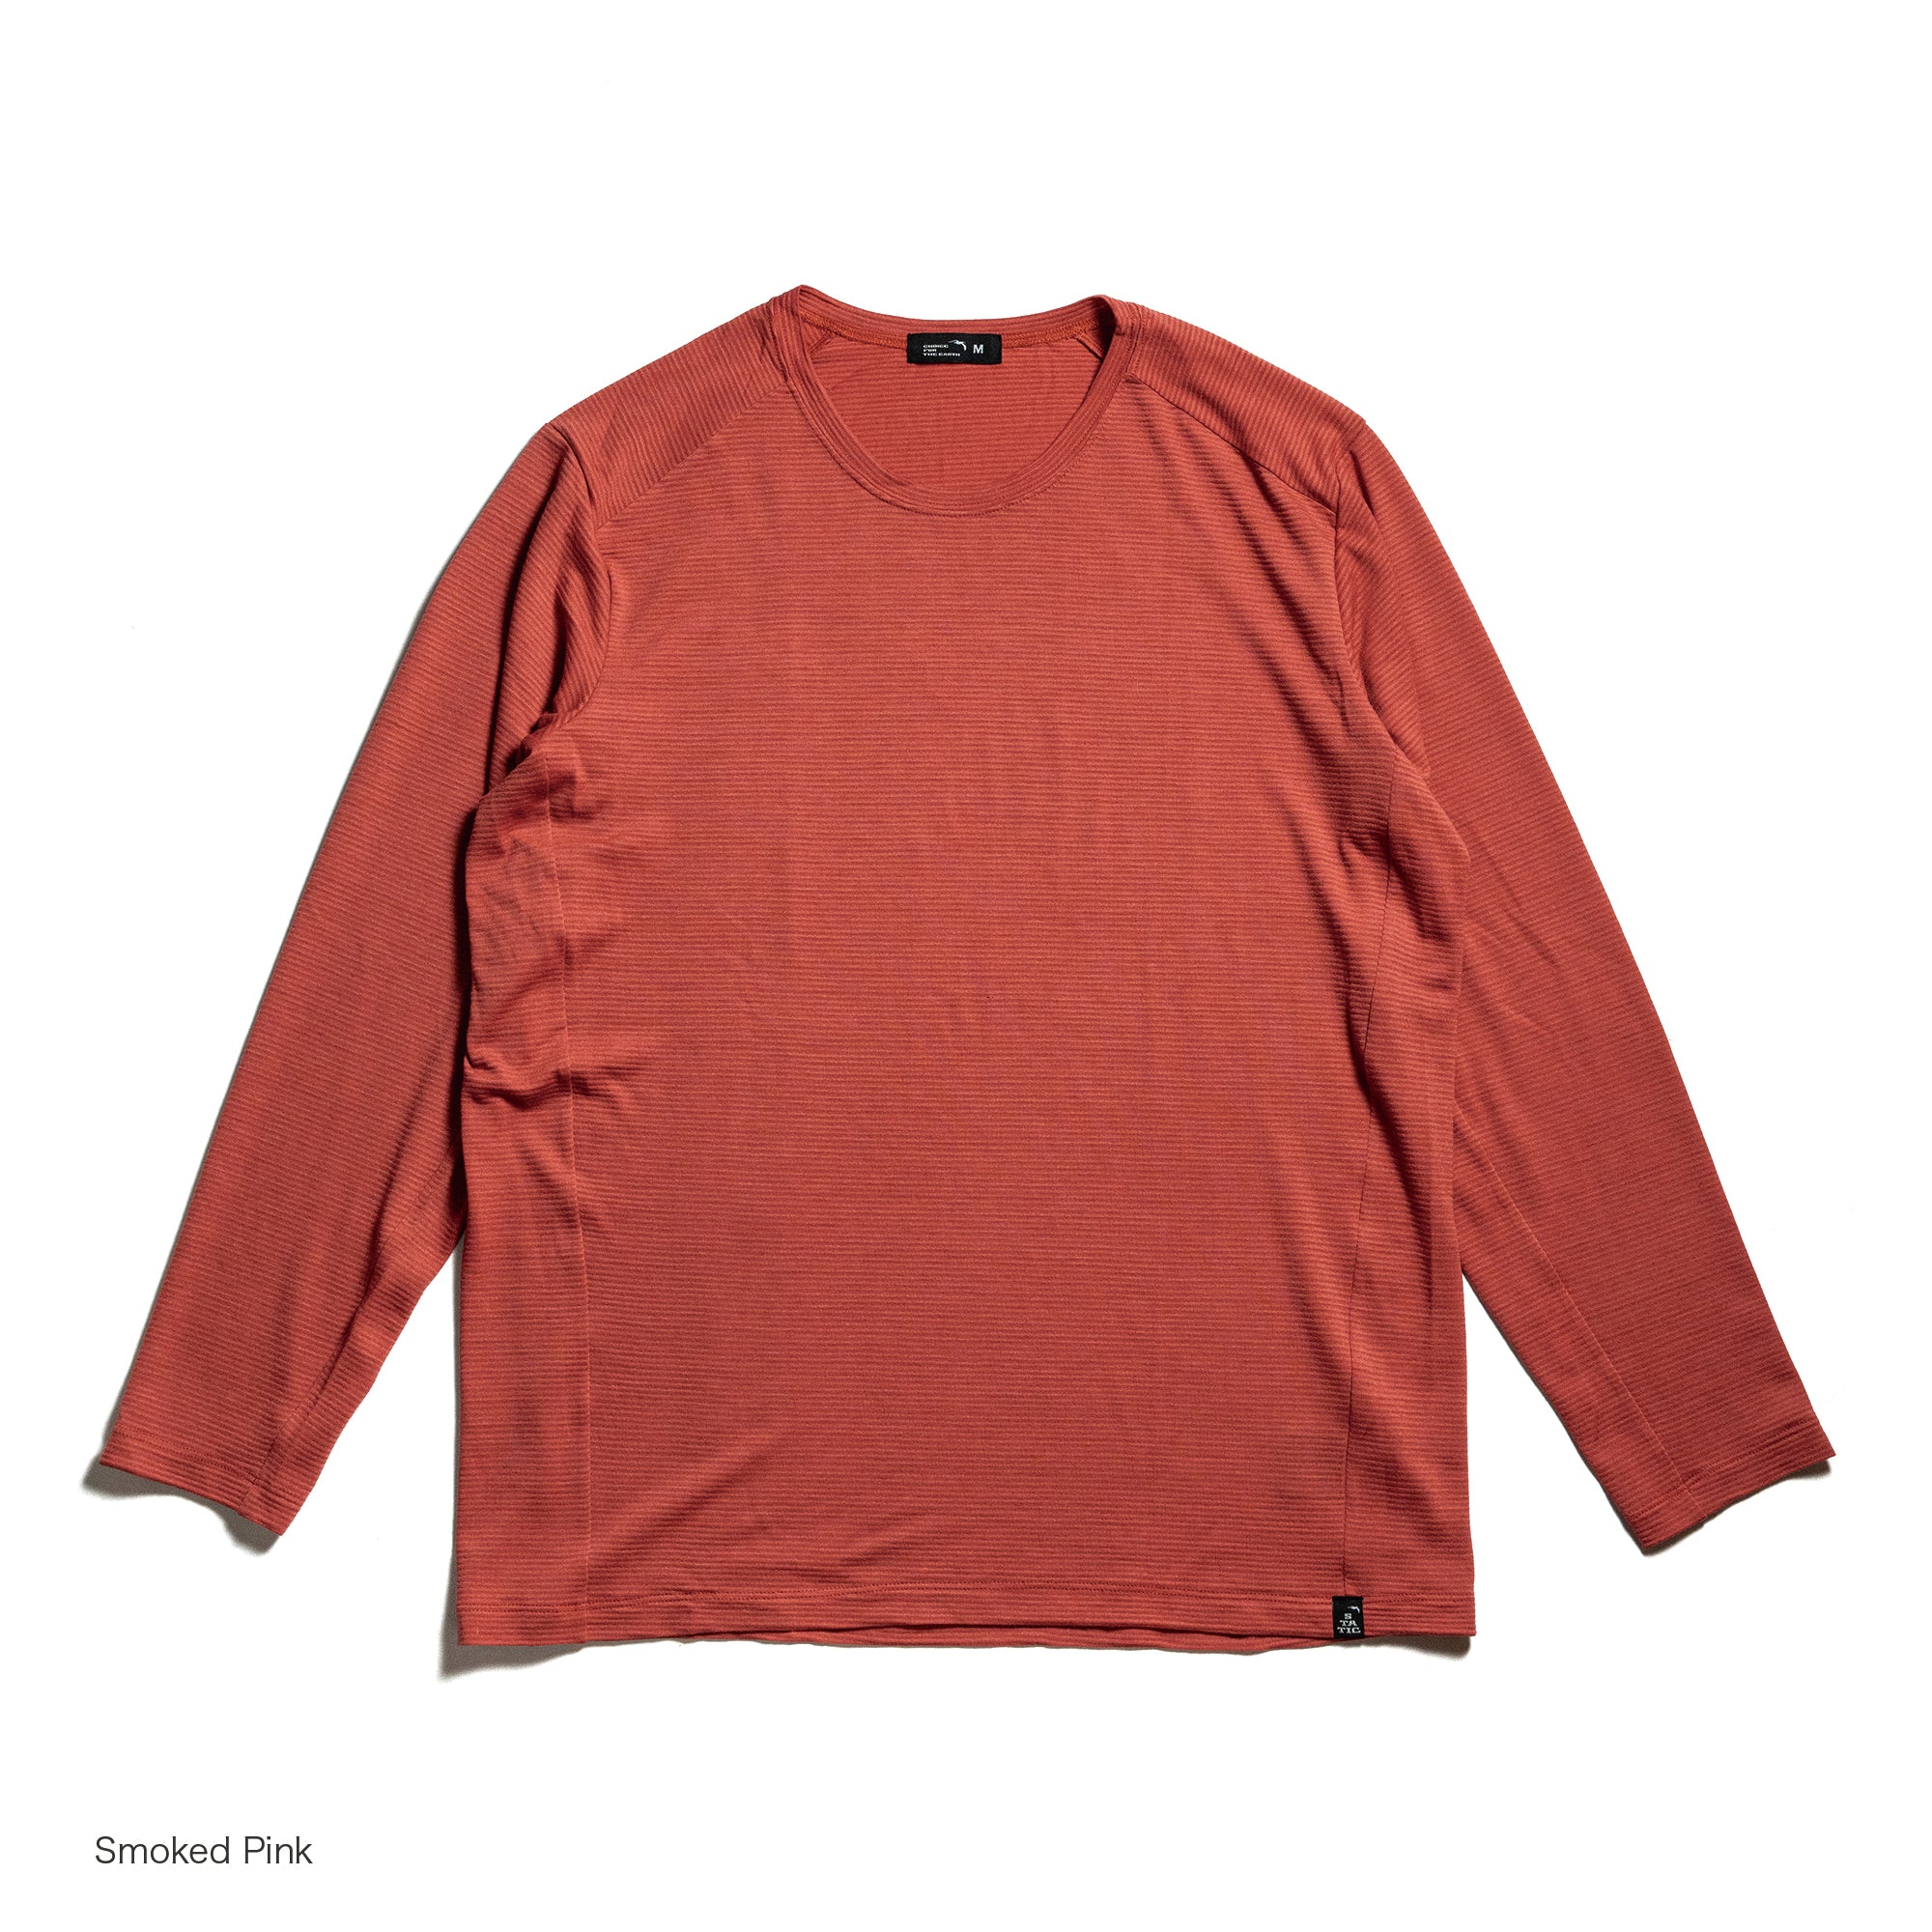 STATIC / ALL ELEVATION L/S SHIRTS M's | STATICBLOOM ONLINE STORE